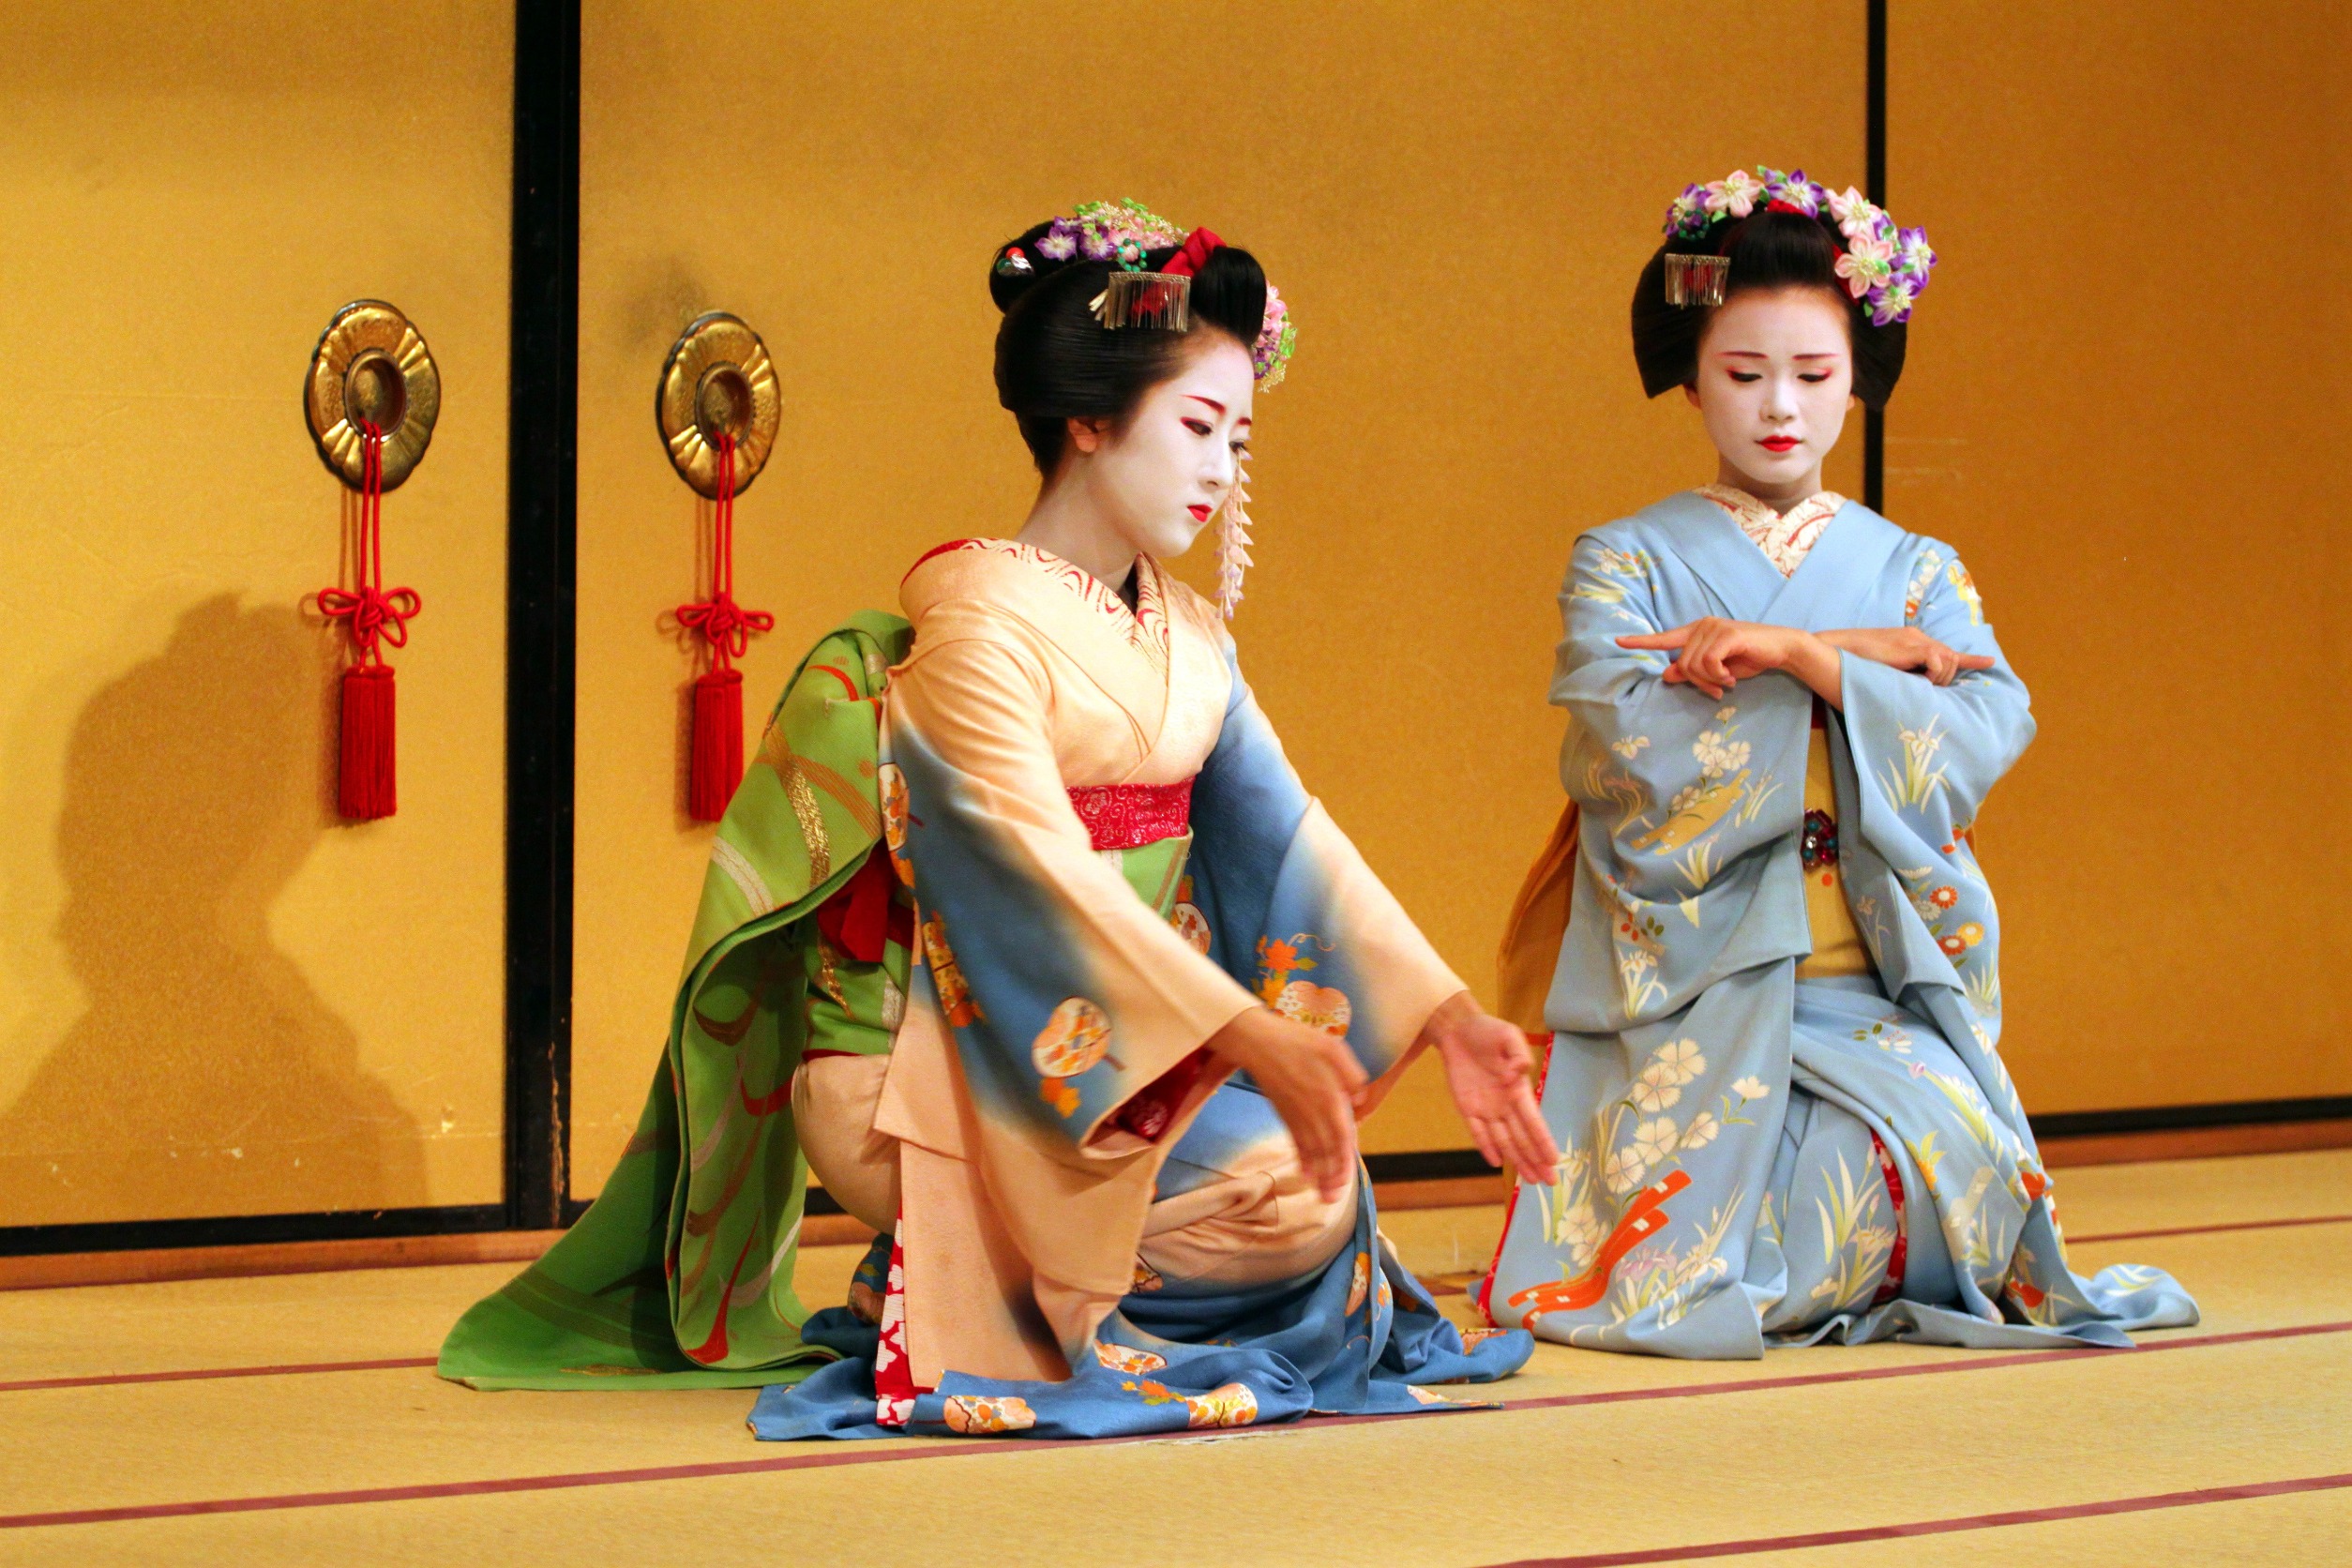 What is a maiko in Japan?